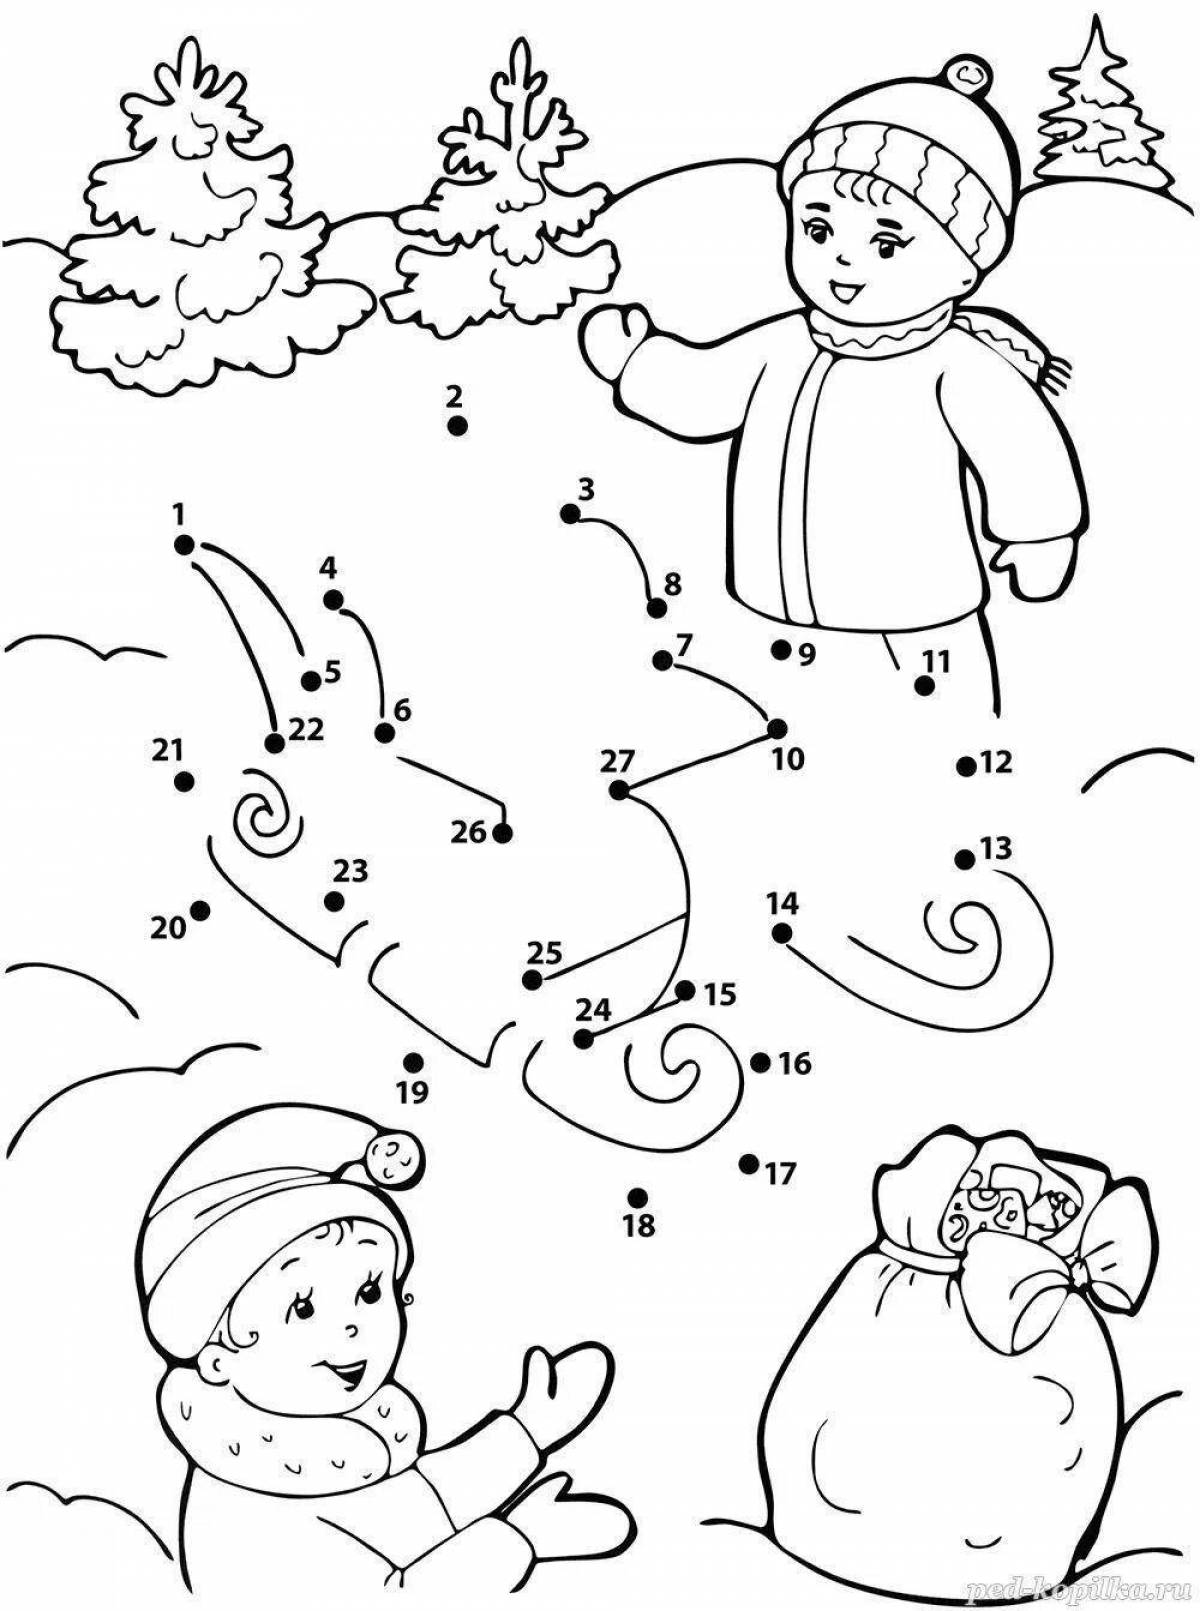 Pre-k ice winter coloring page